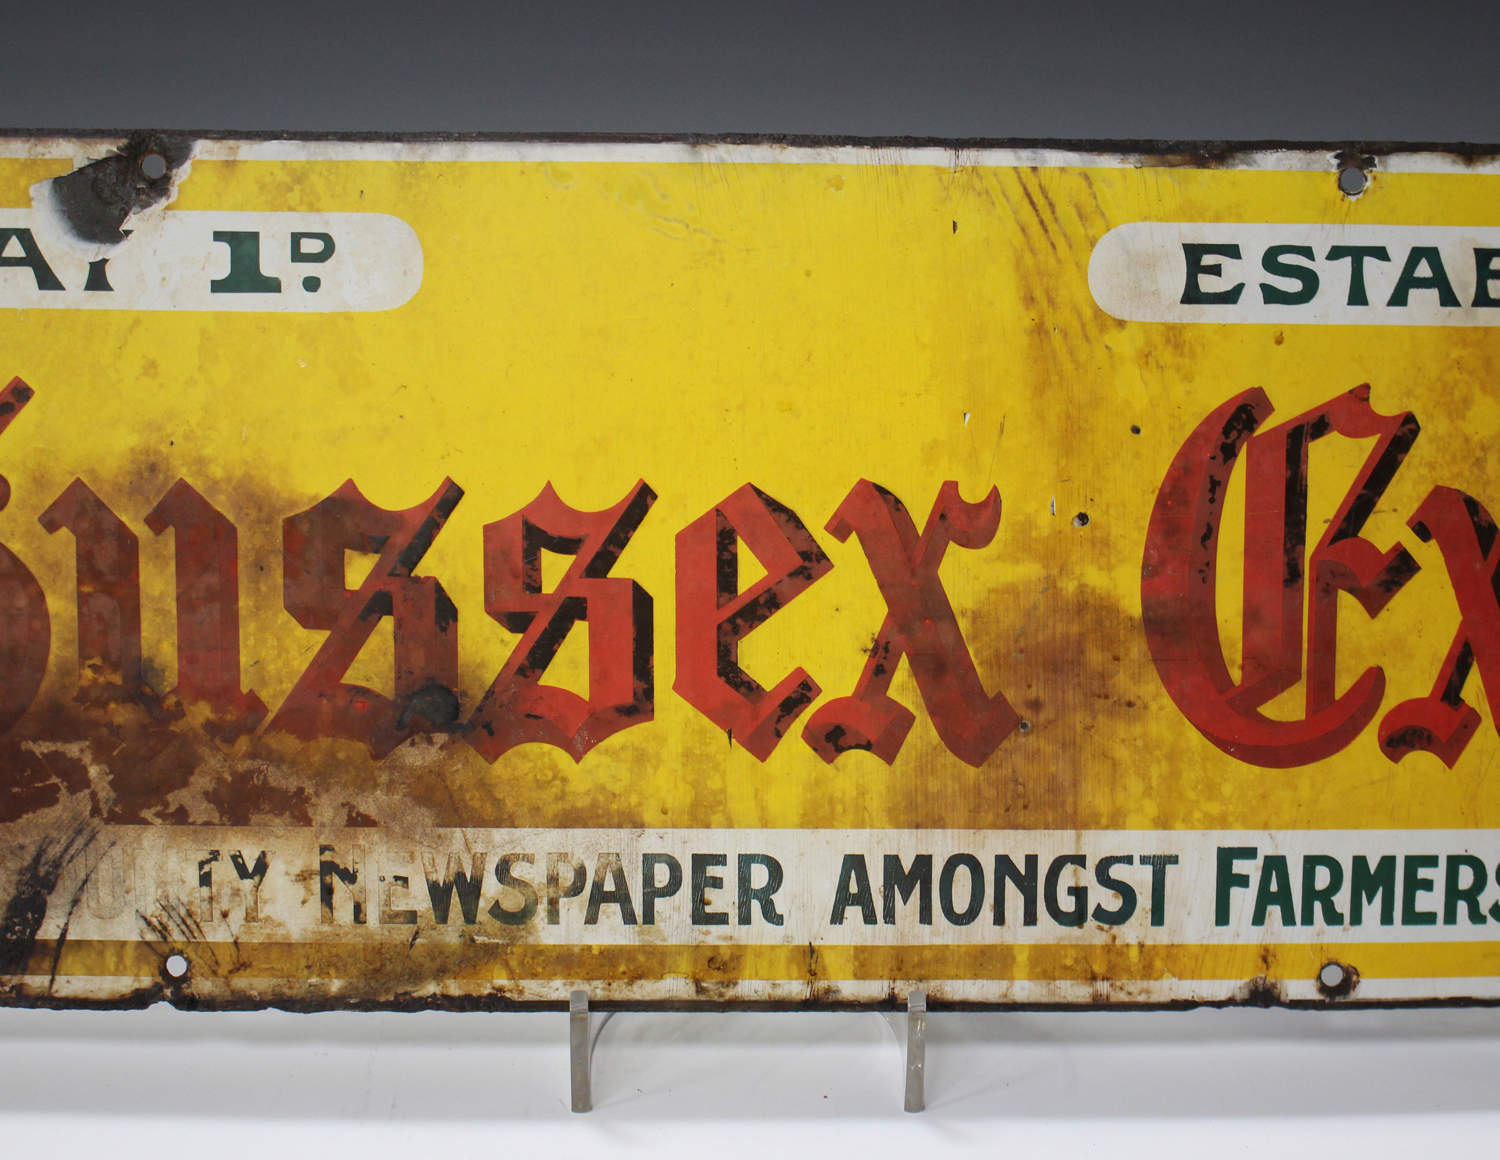 A Sussex Express newspaper enamelled advertising sign, 'The Leading County Newspaper amongst Farmers - Image 4 of 5